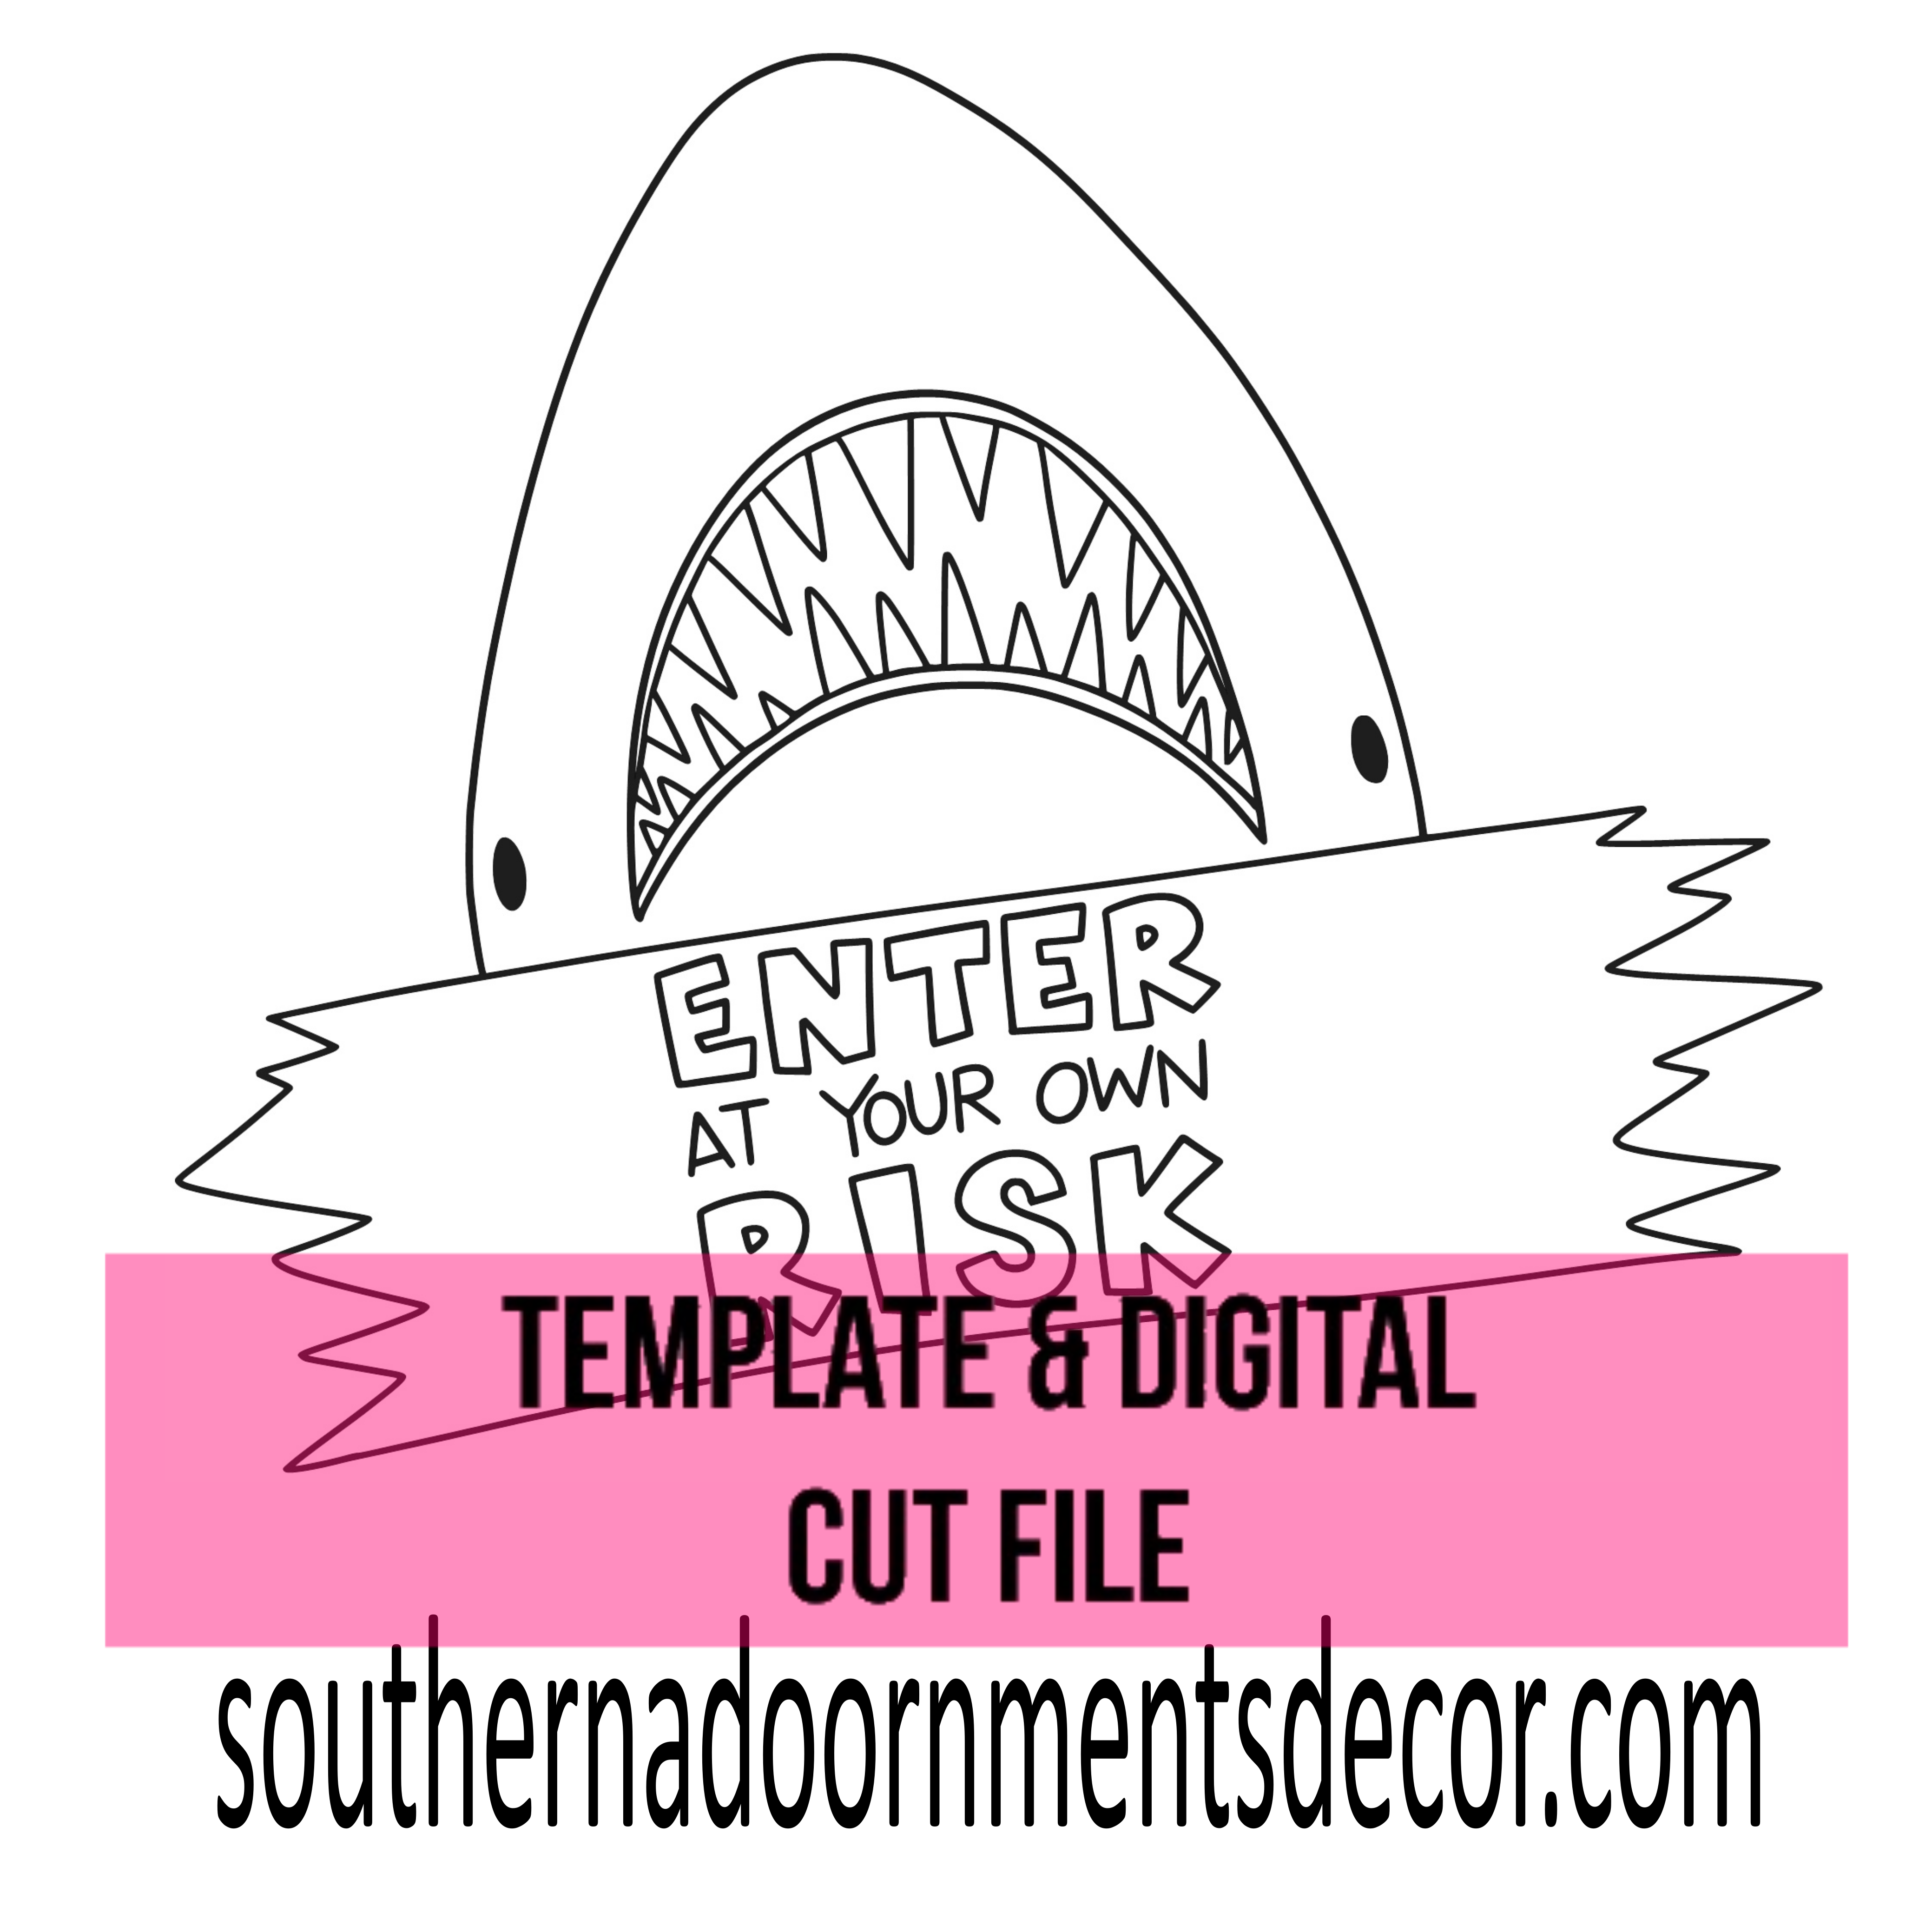 Enter At Your Own Risk Template & Digital Cut File